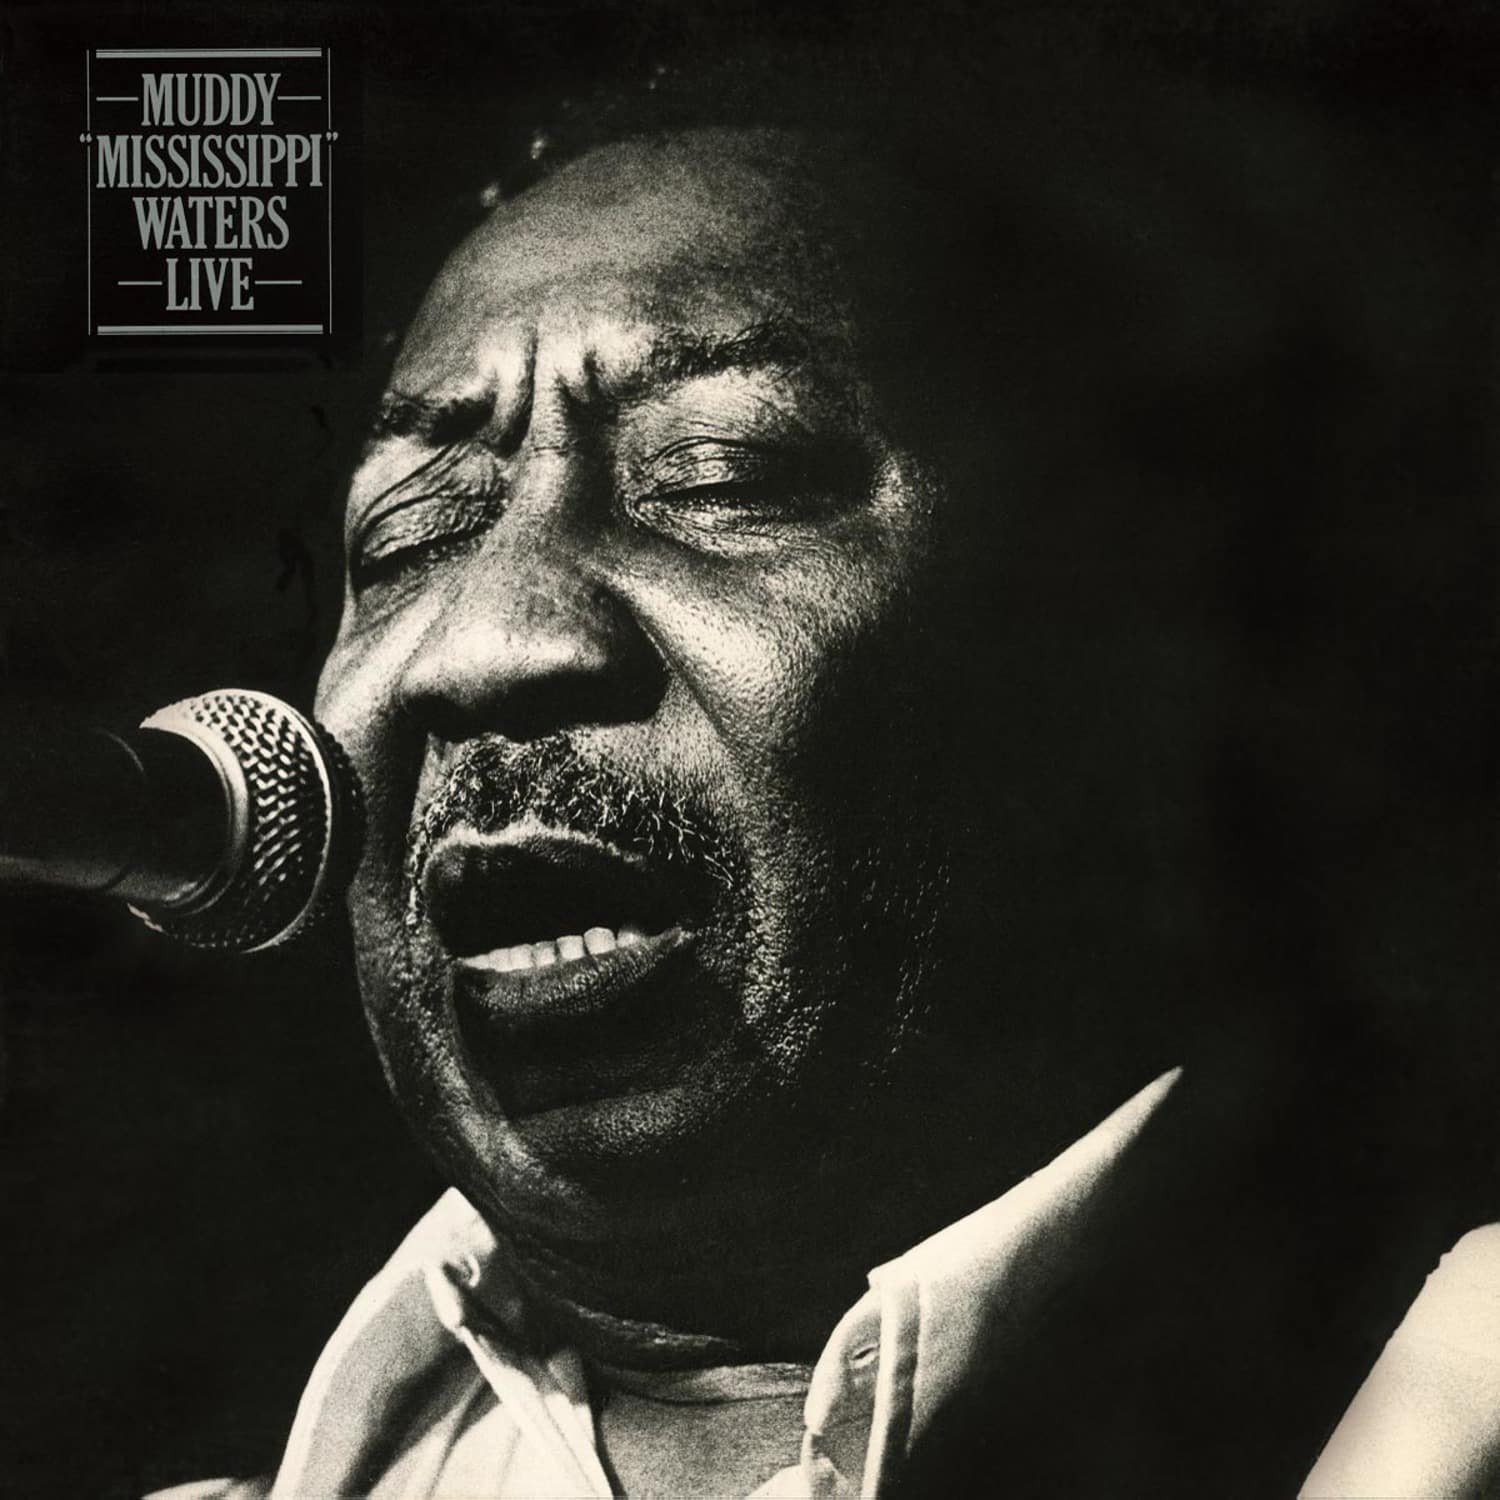 Muddy Waters - MUDDY MISSISSIPPI LIVE 